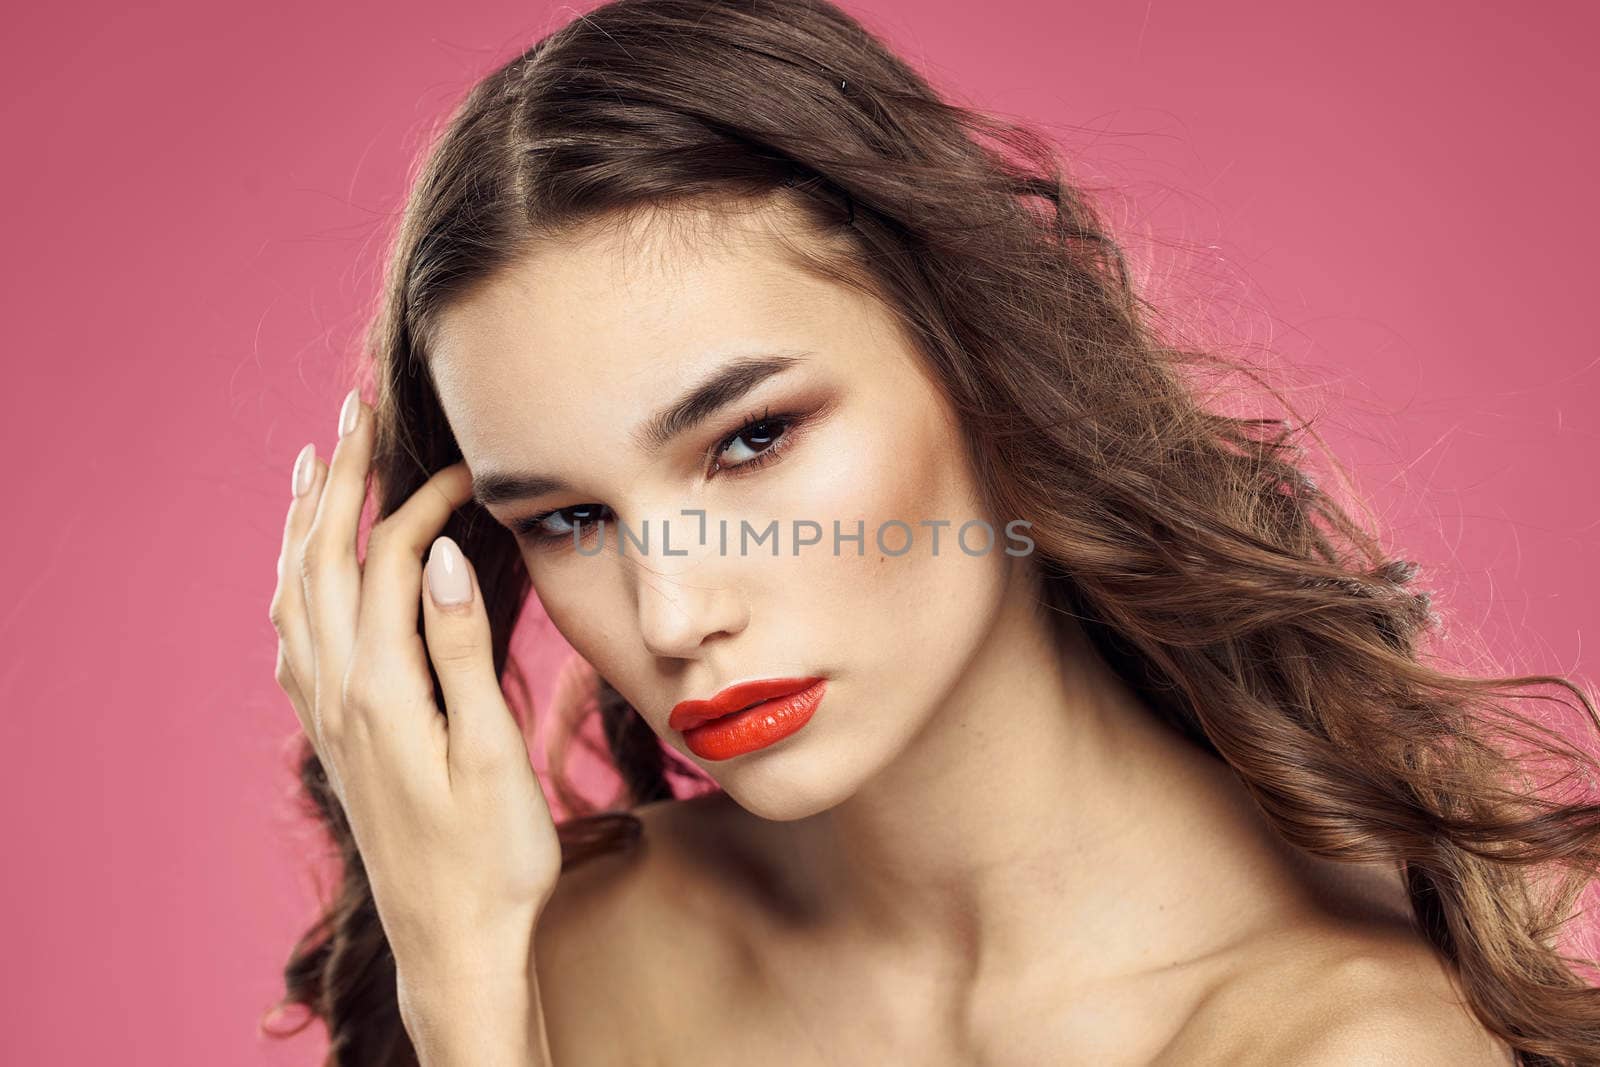 Attractive woman fashionable hairstyle bared shoulders and red lips pink background by SHOTPRIME